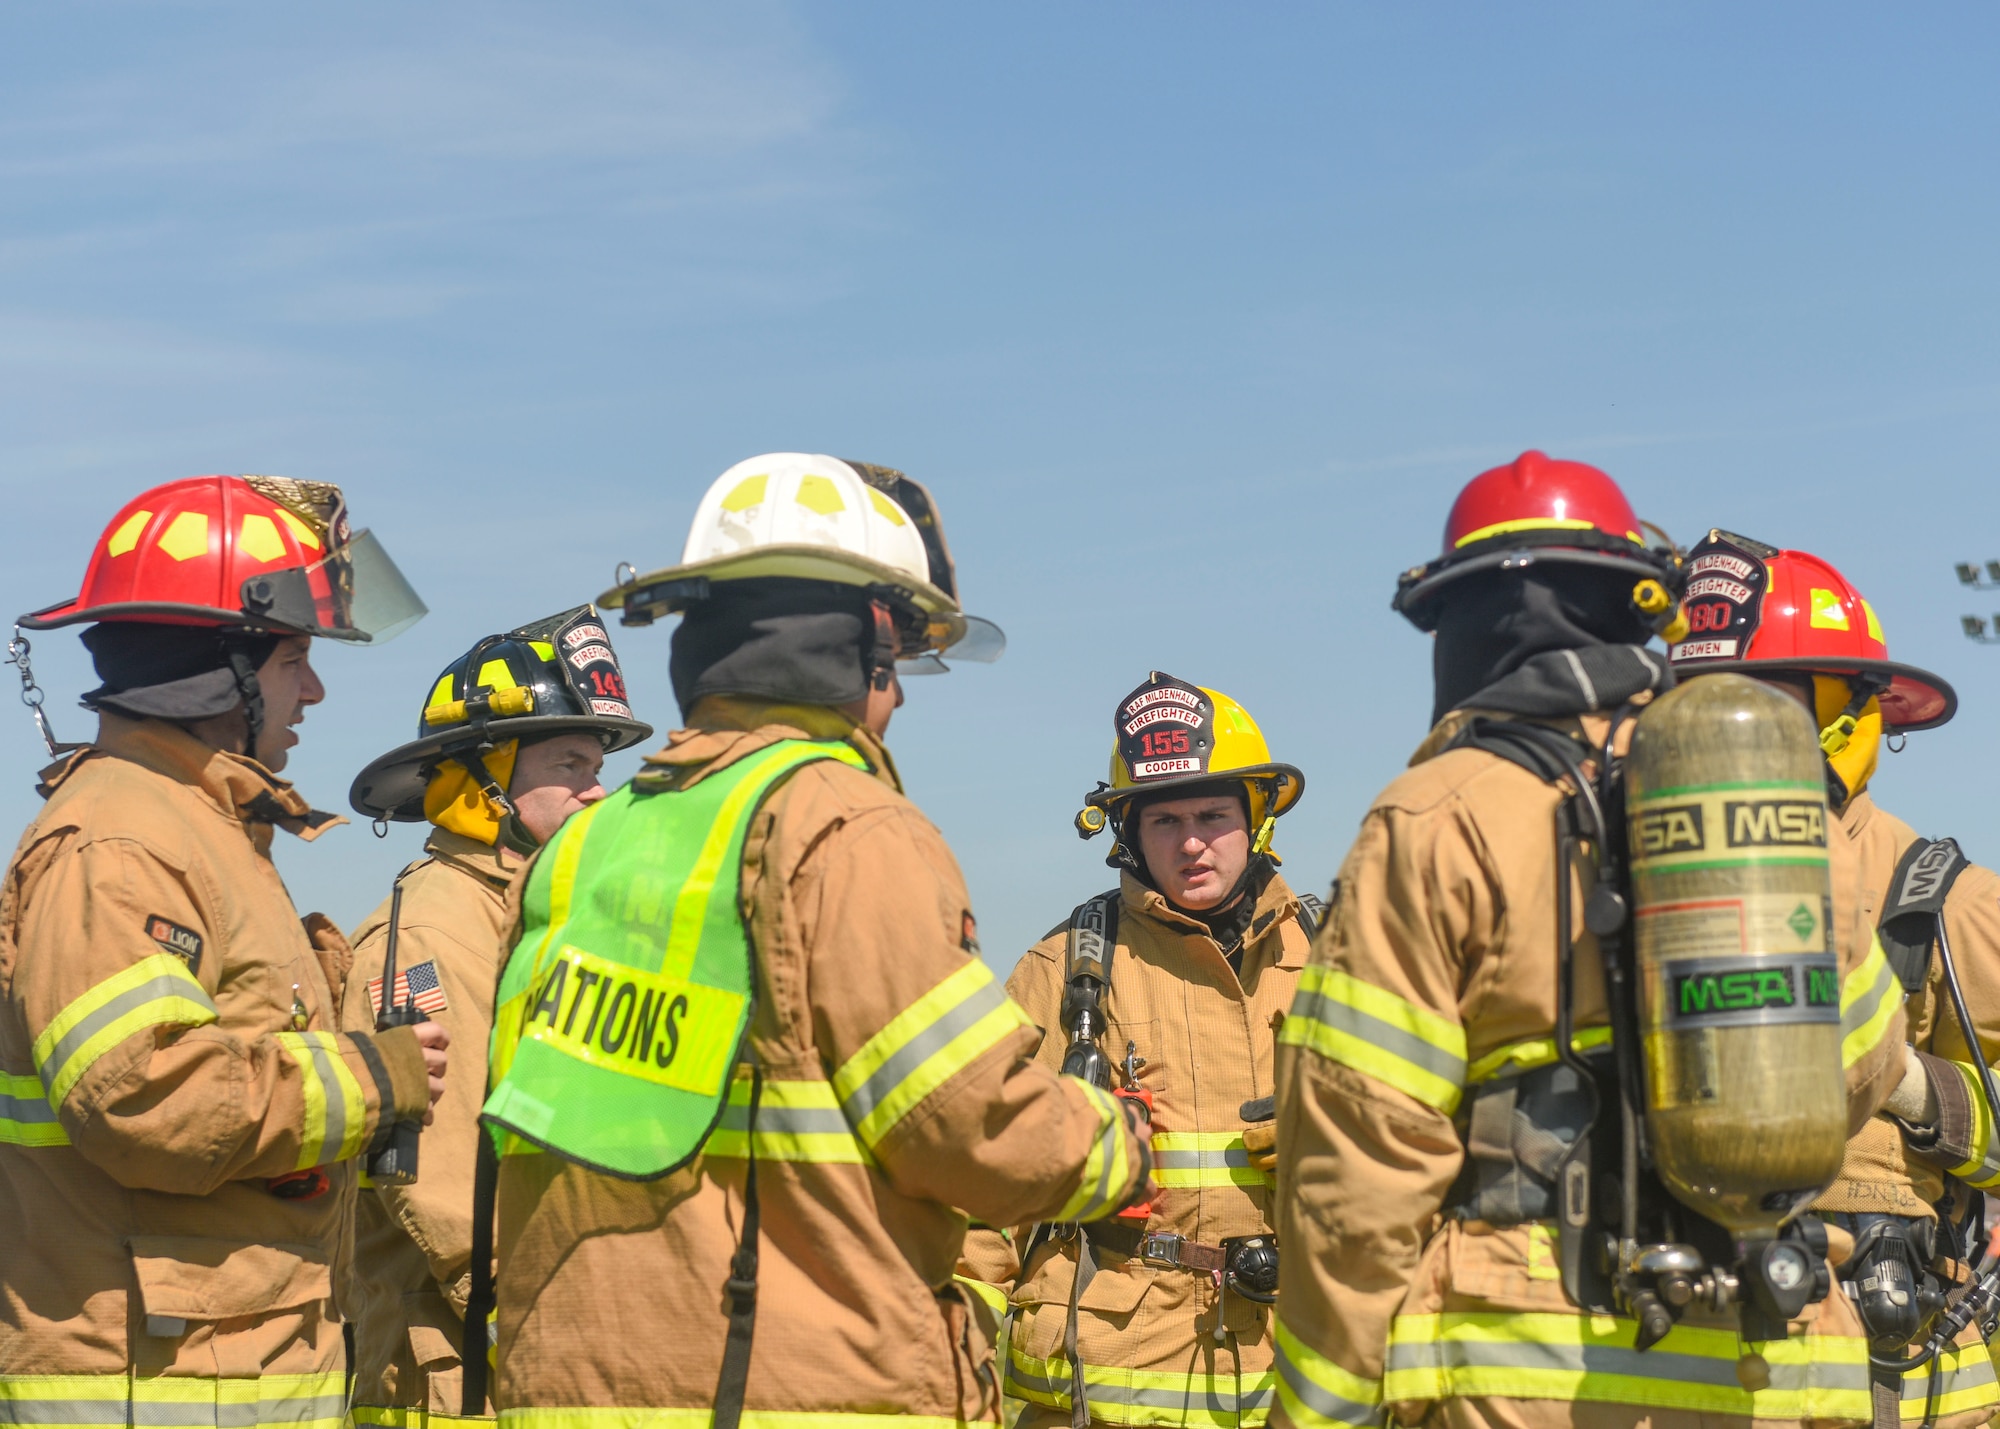 Firefighters discuss the appropriate response to a simulated fuel spill at RAF Mildenhall, England, May 15, 2019. The exercise tested the base's response to 65,000 gallons of spilled fuel. The fuel spill exercise was conducted to test the base’s response and recovery capabilities. (U.S. Air Force photo by Airman 1st Class Joseph Barron)